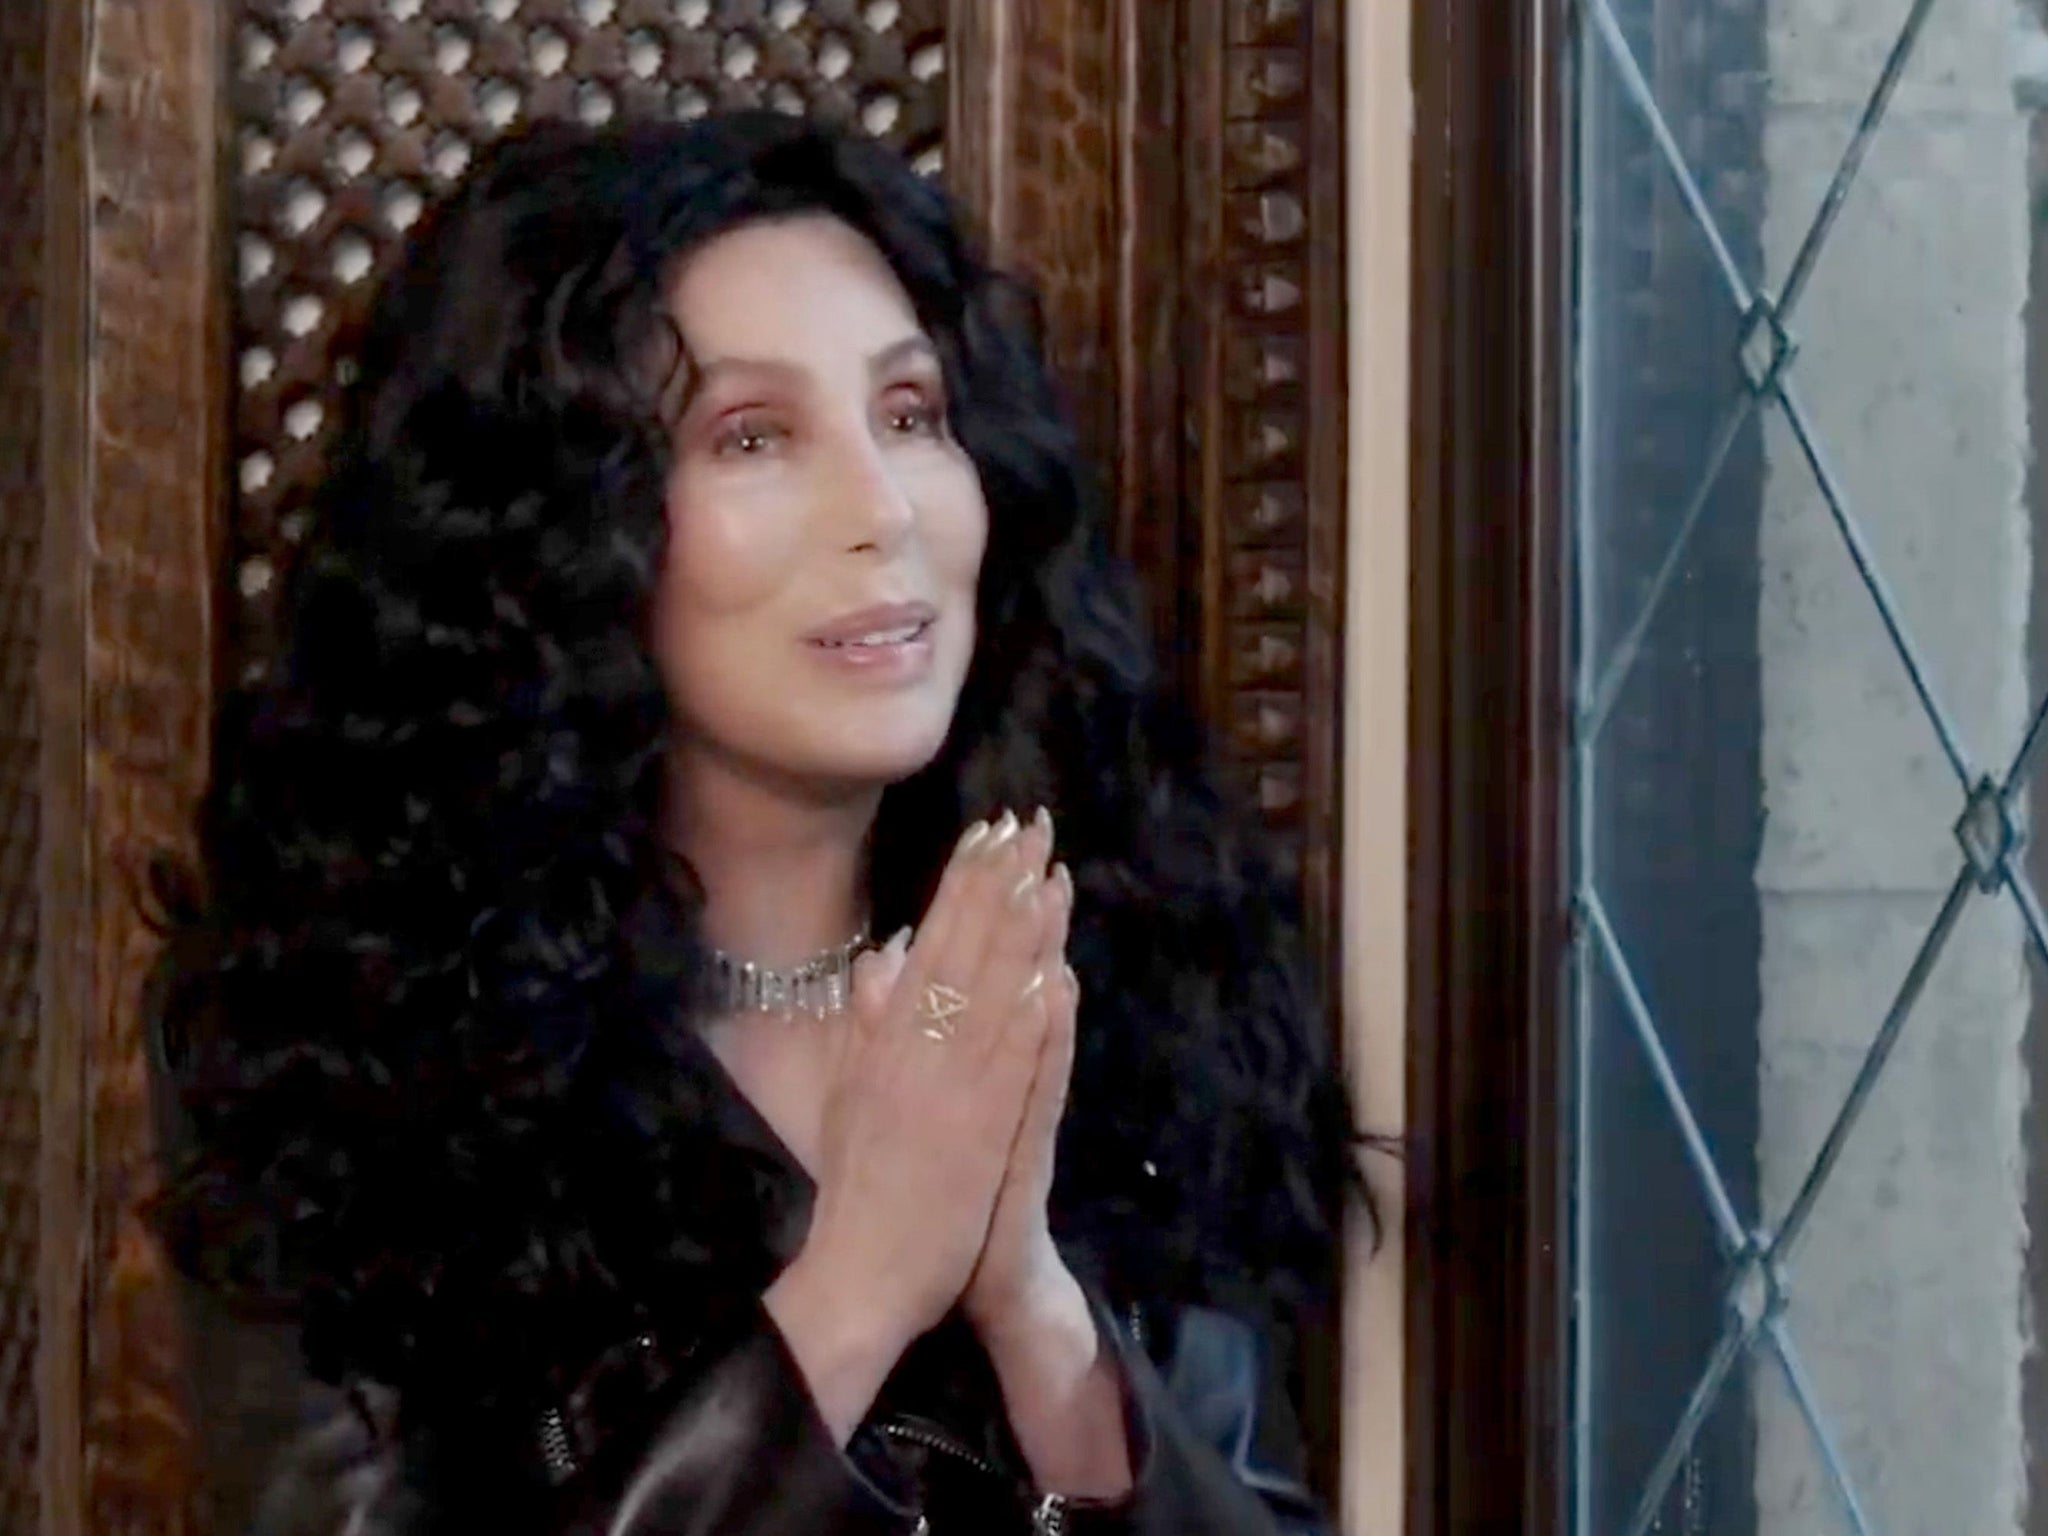 Cher during the ‘We The People’ pre-inaugural concert on 17 January 2021